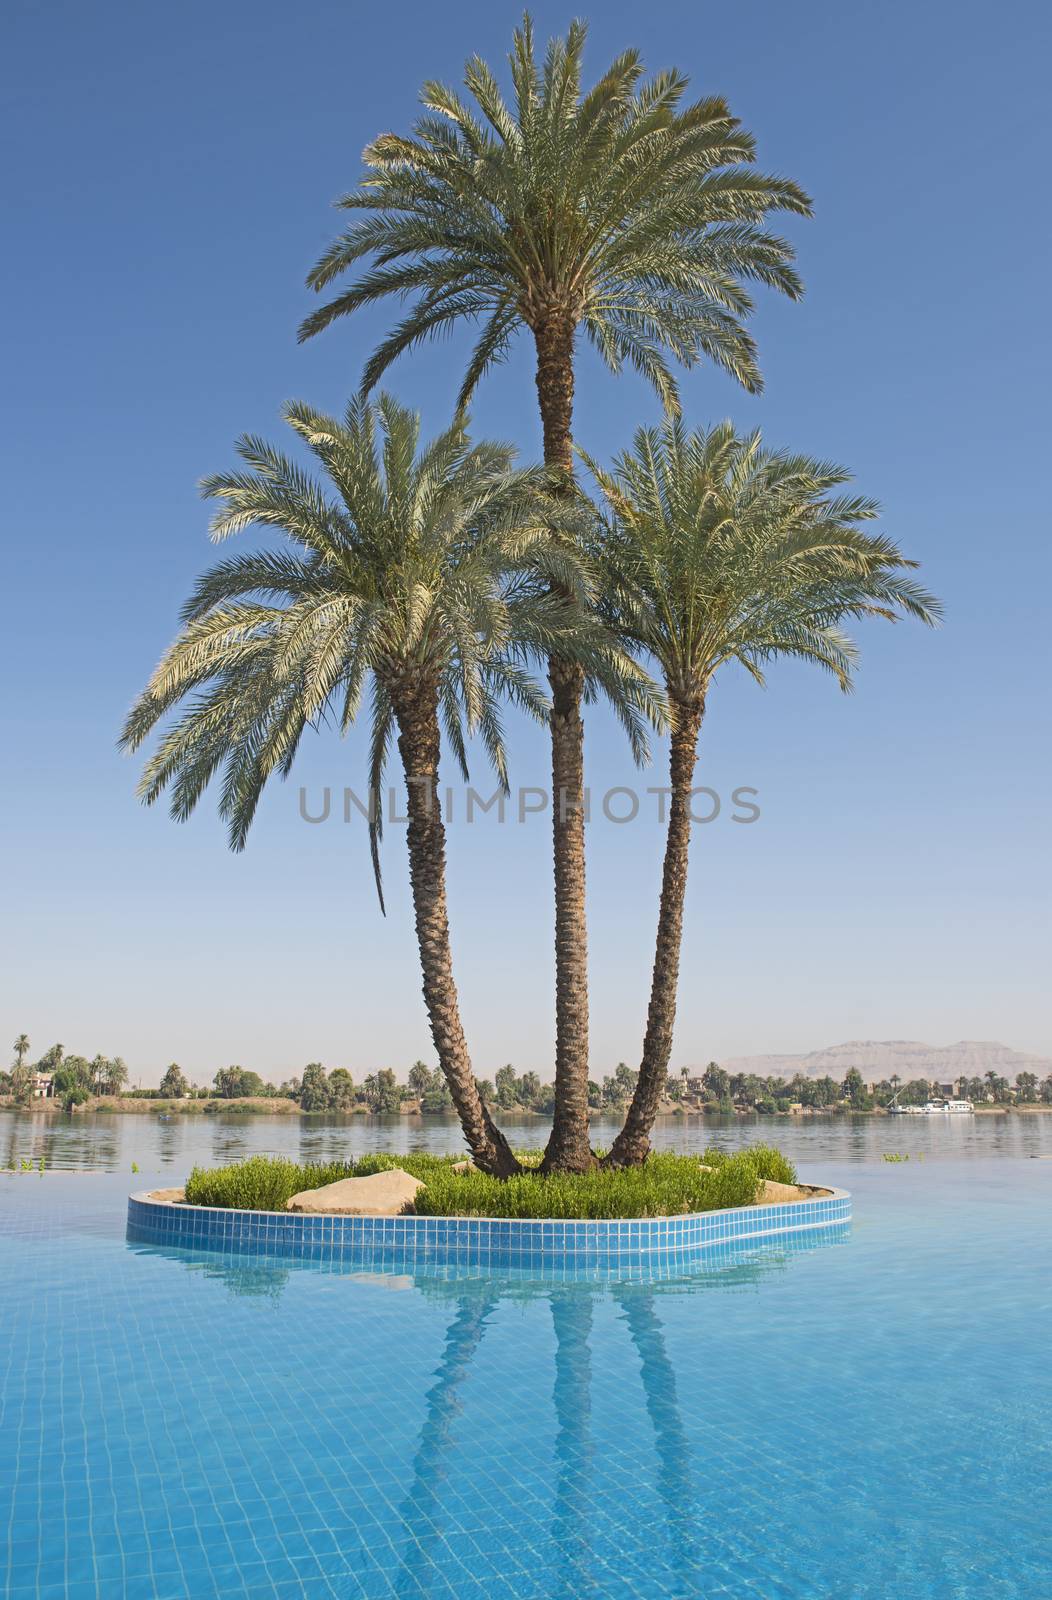 Large date palm tree on island in infinity swimming pool by paulvinten